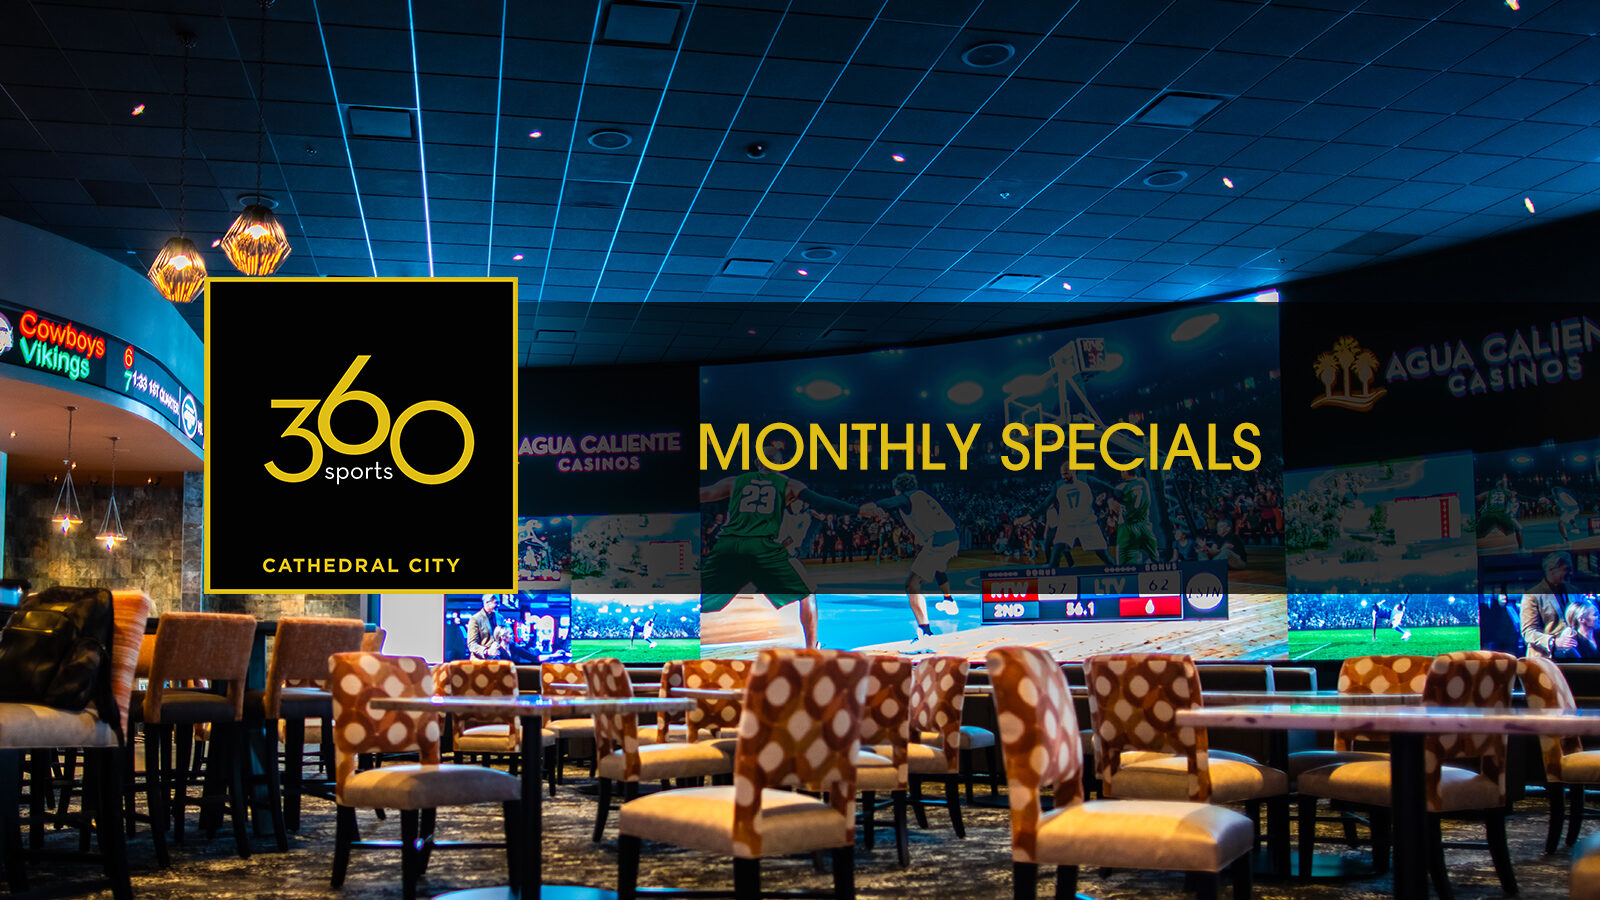 360 Sports Cathedral City Specials